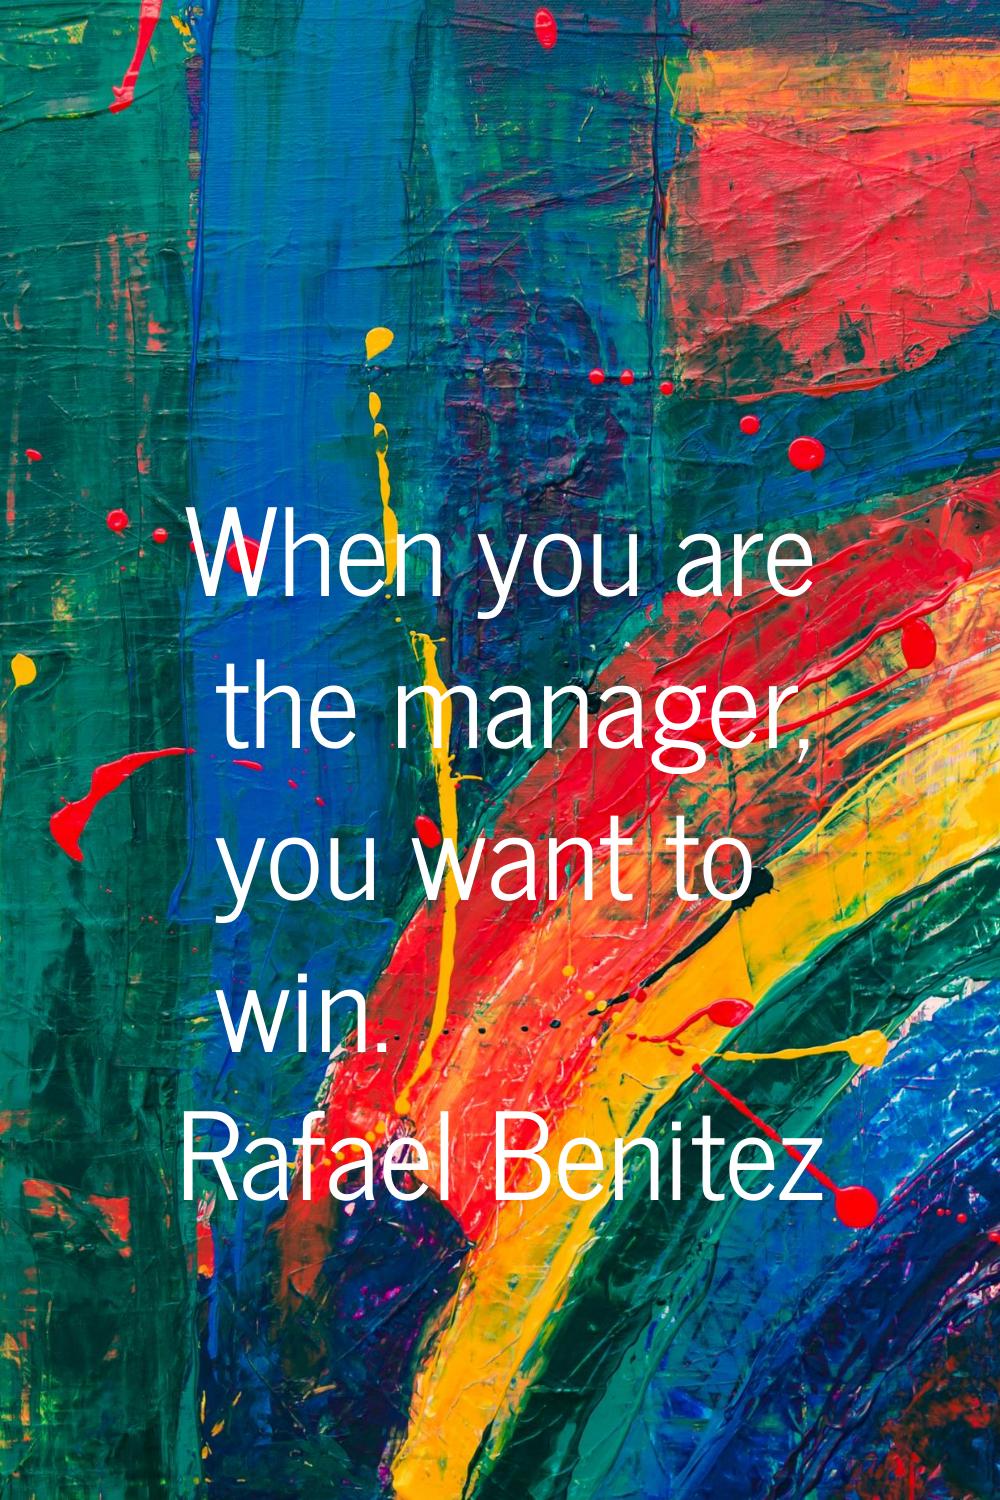 When you are the manager, you want to win.